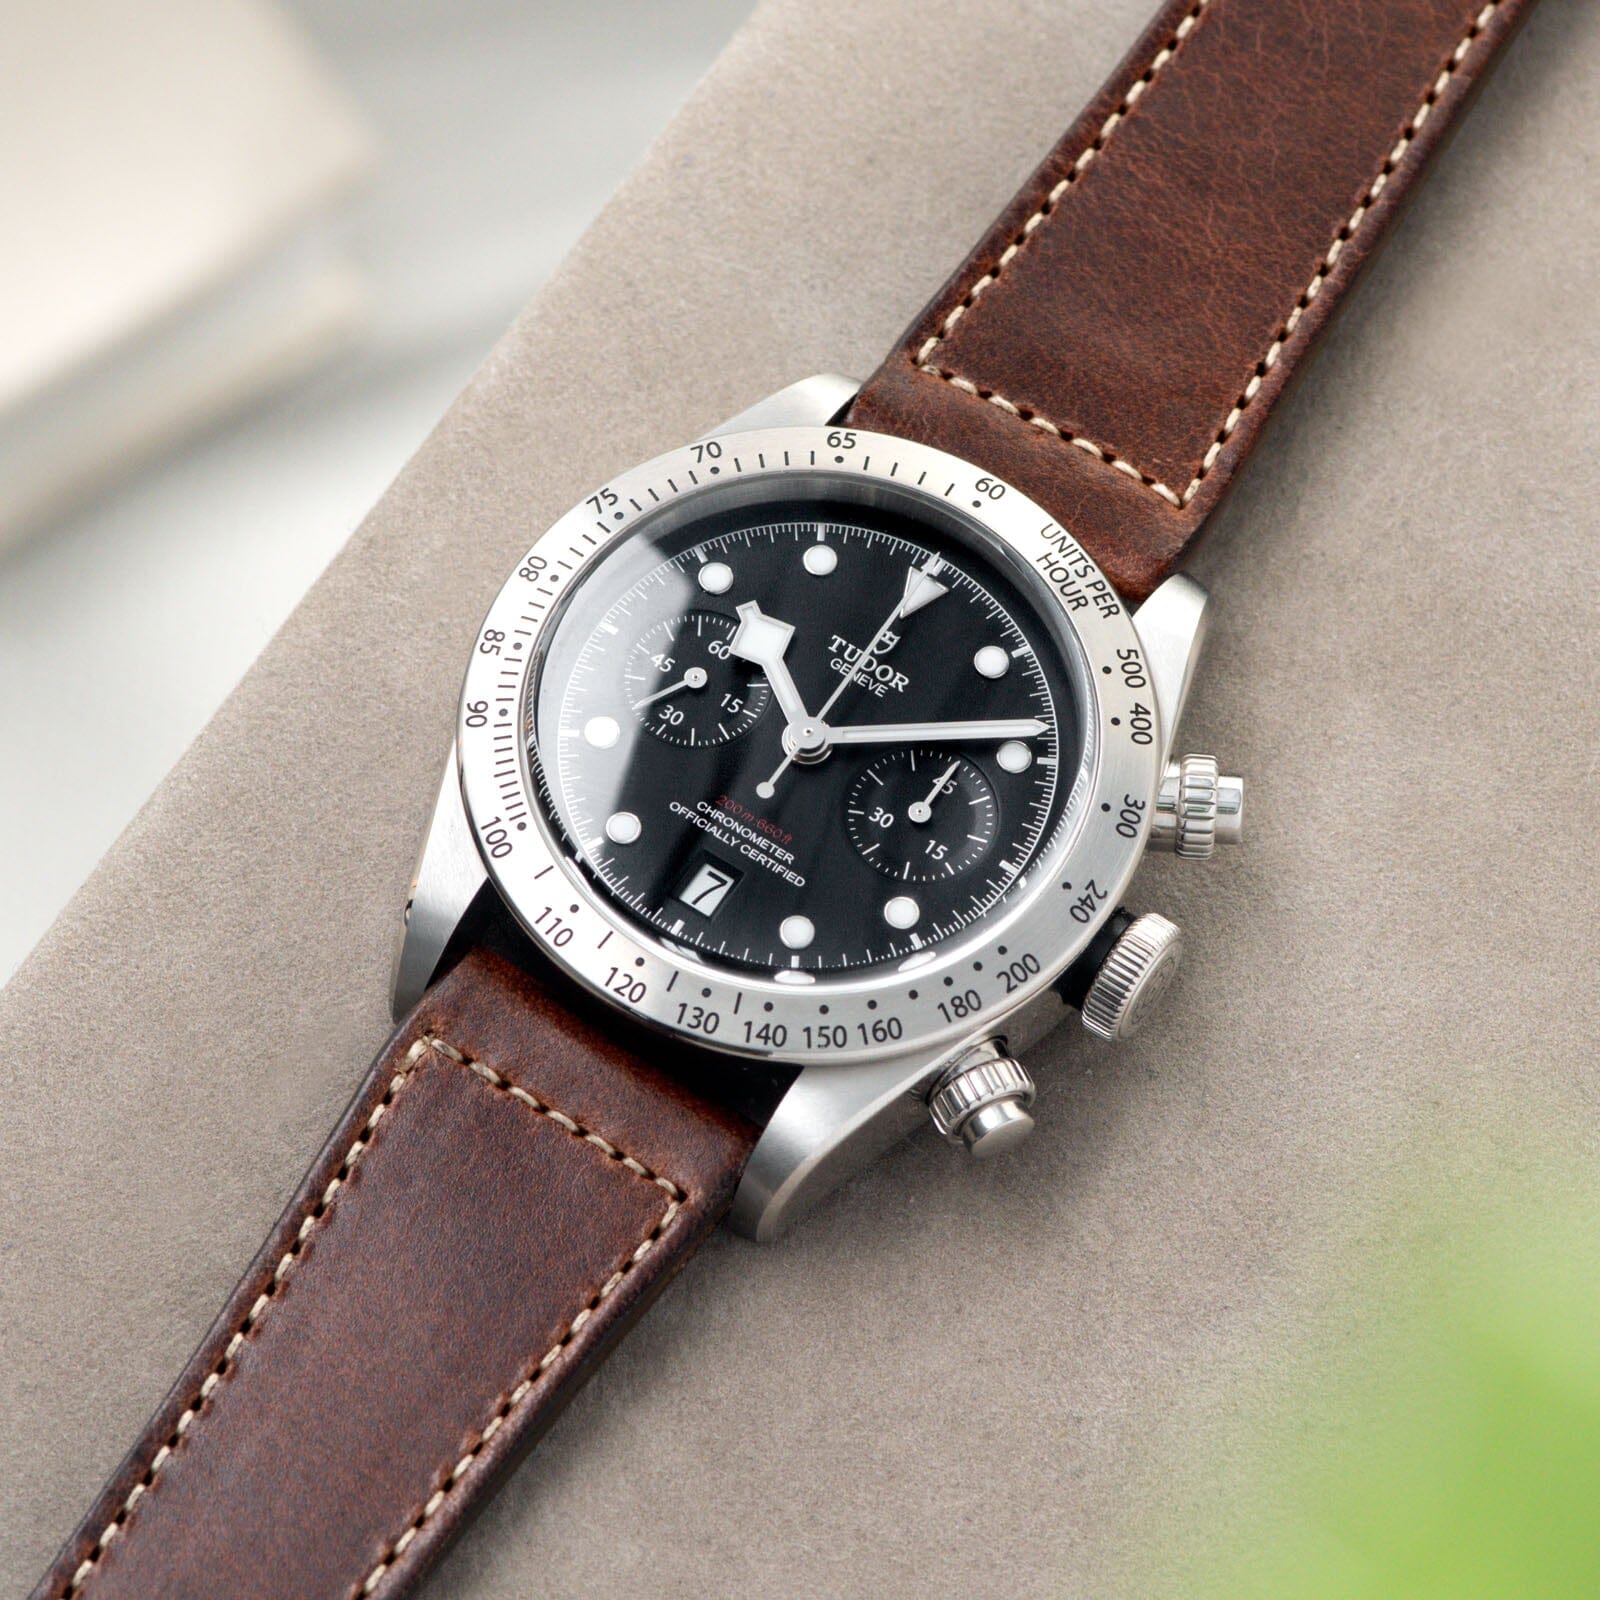 Chronograph brown leather watch